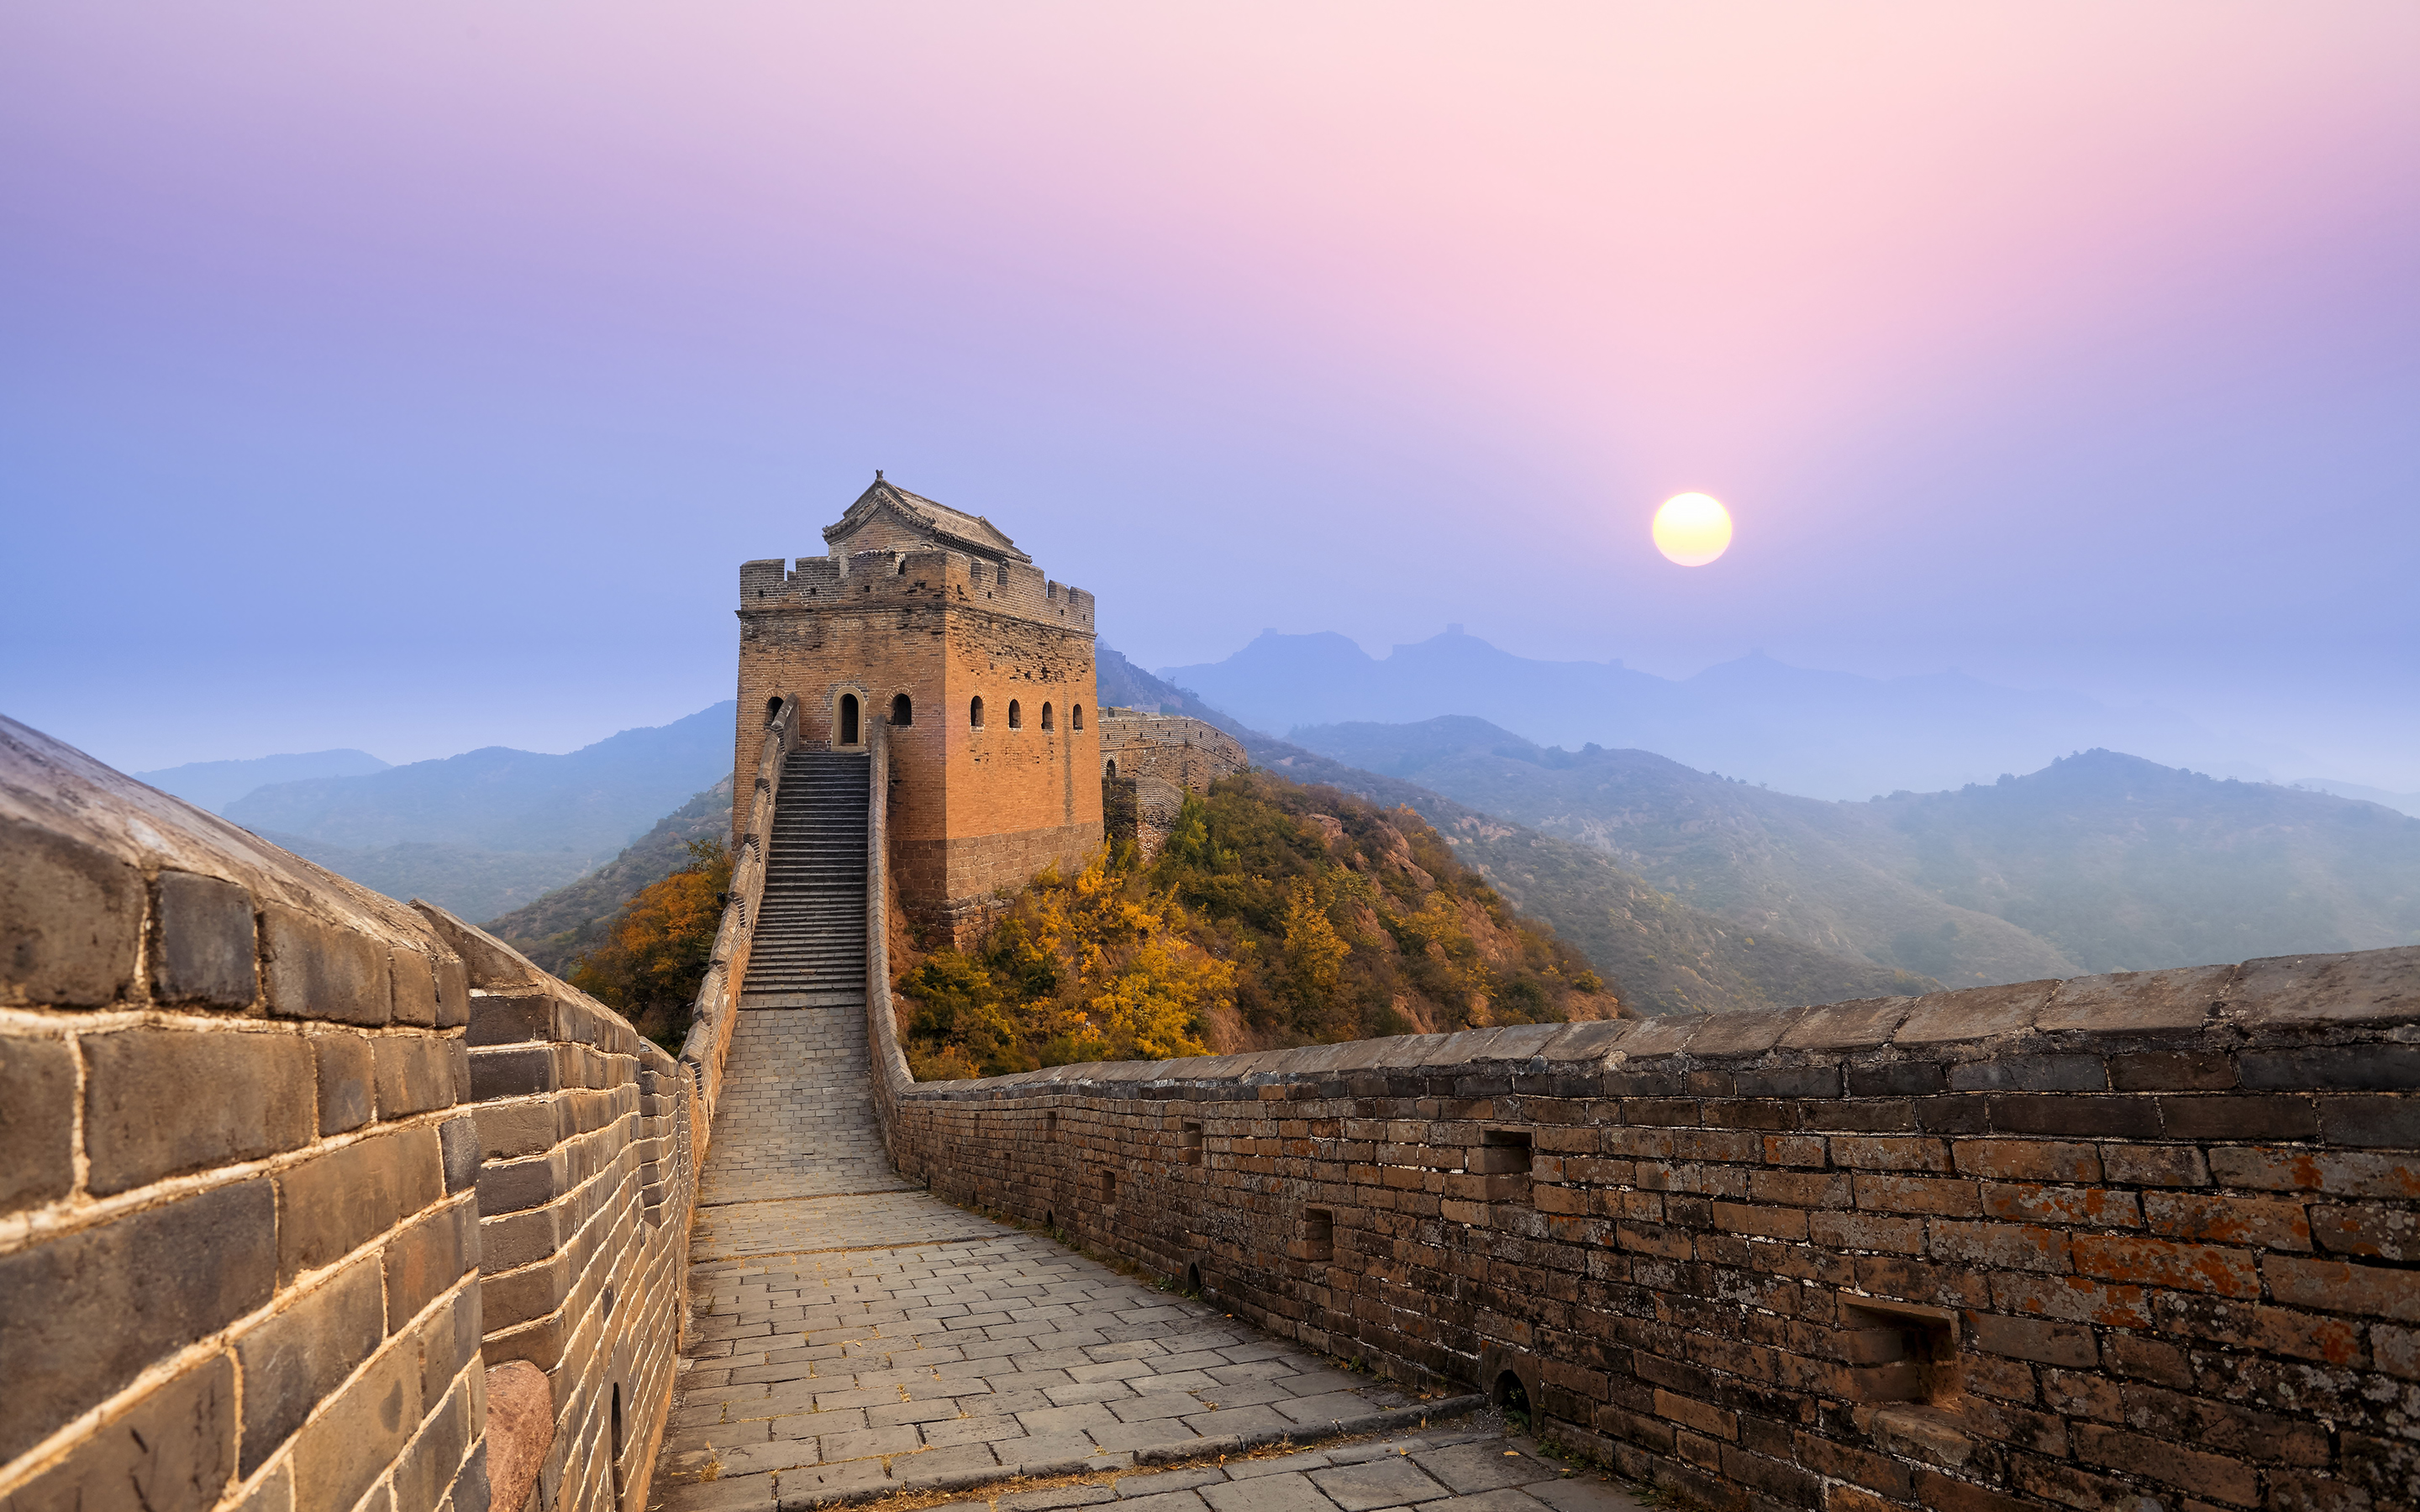 Great Wall Of China Wallpaper And Background Image